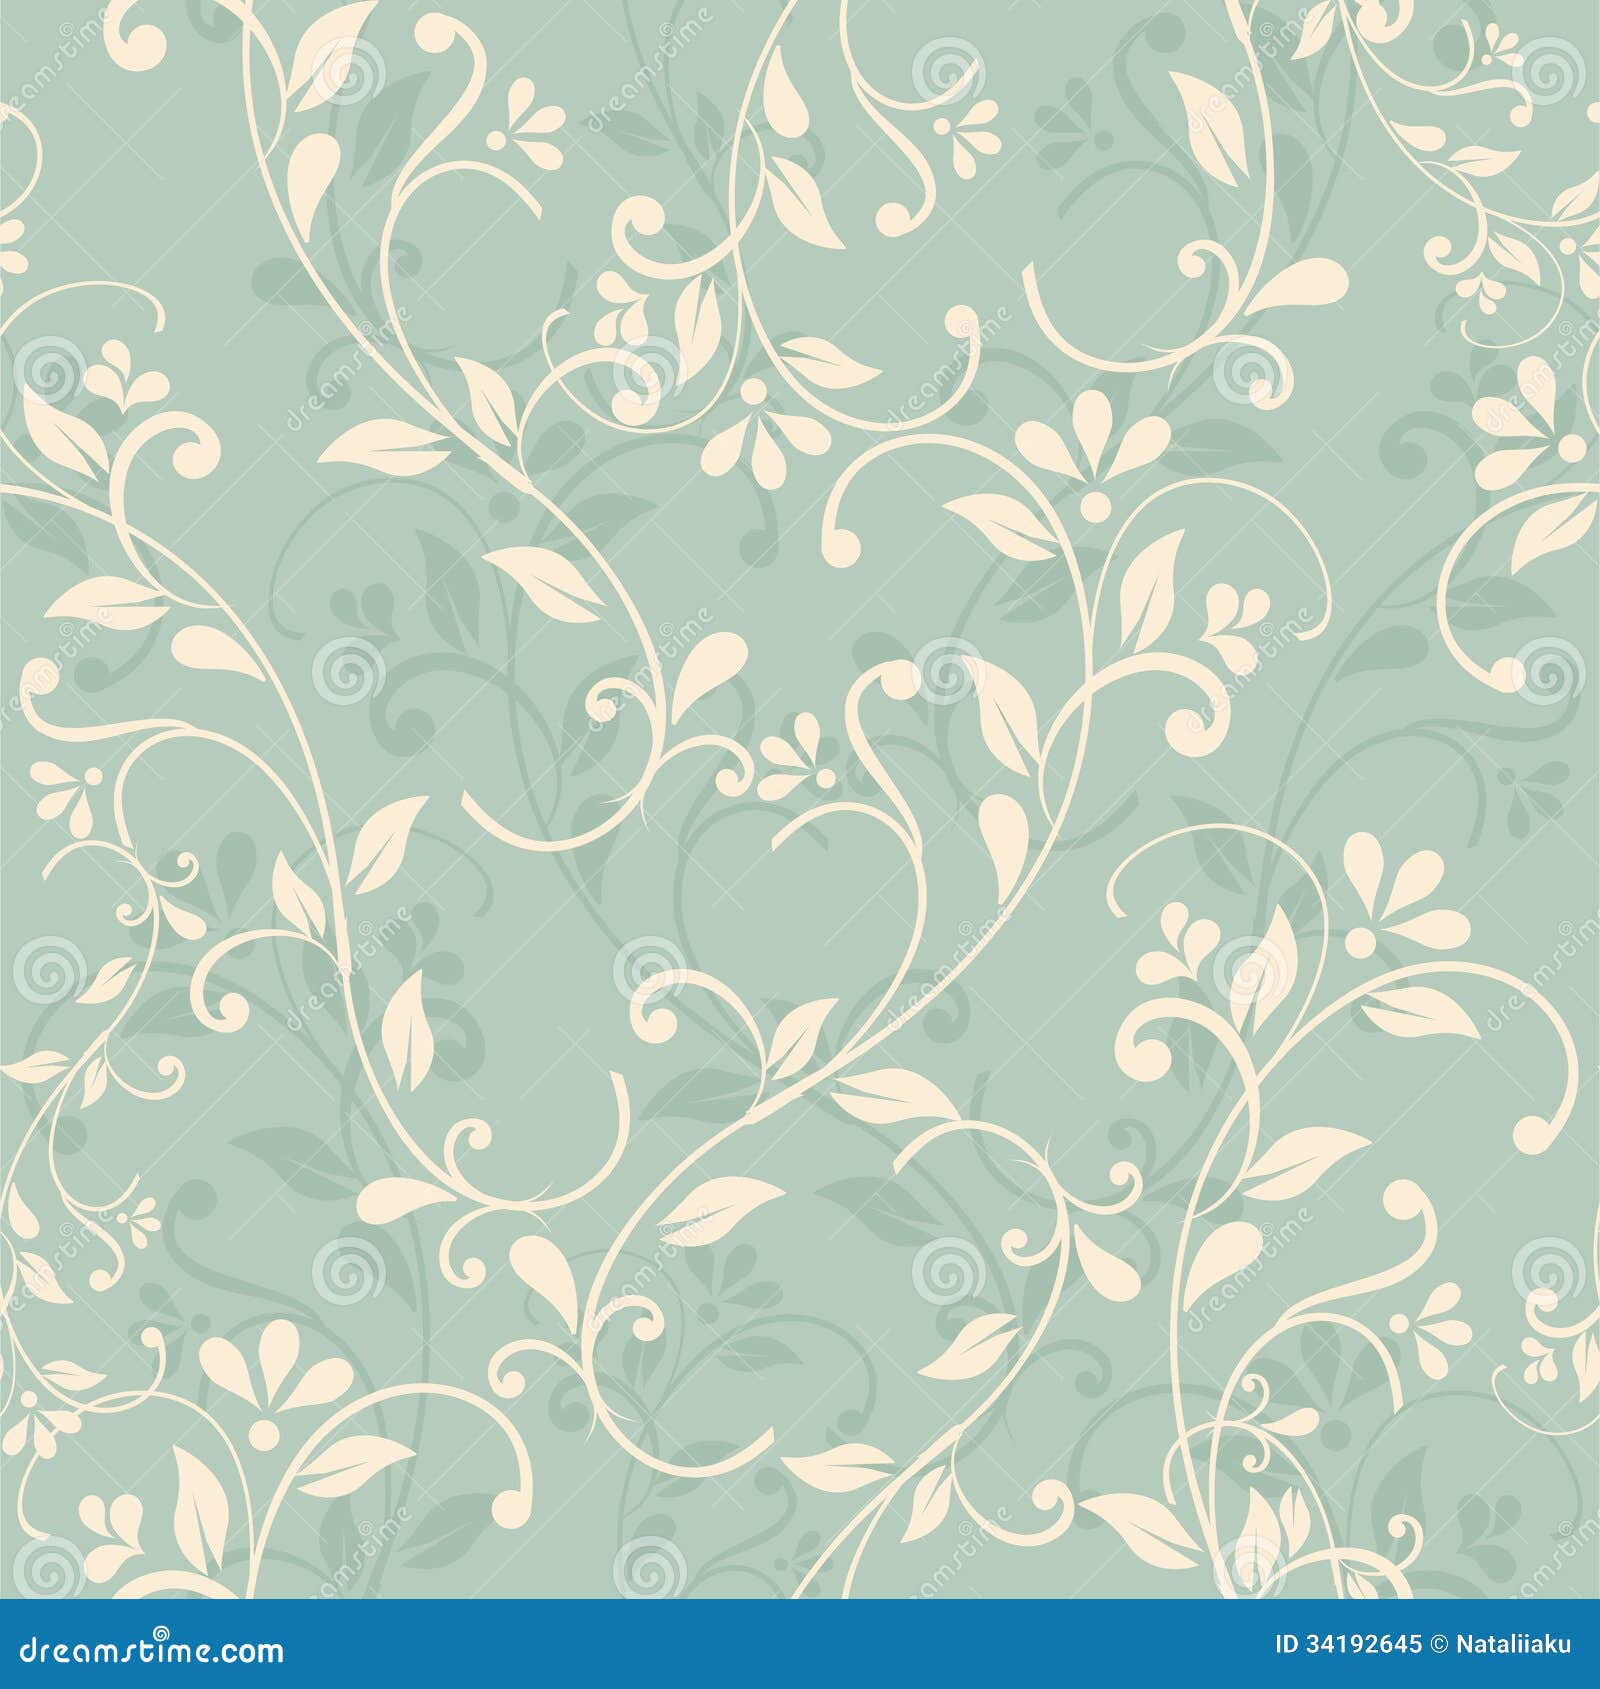 Seamless floral pattern stock vector. Illustration of fresh - 34192645